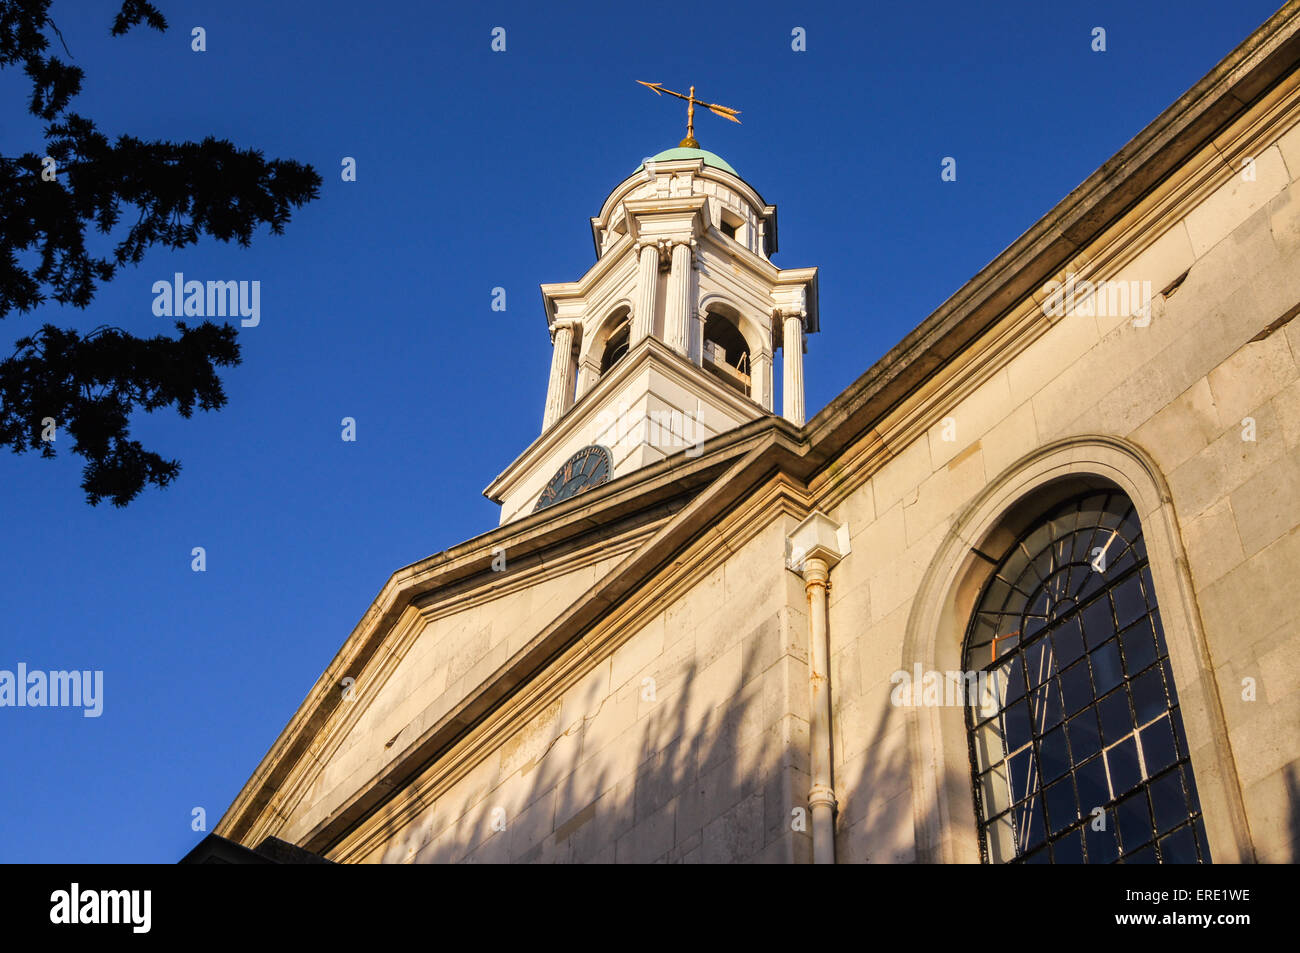 Exterior of the Church of St. Mary the Virgin, by Thomas Hardwick, 1790, Wanstead, London, England Stock Photo